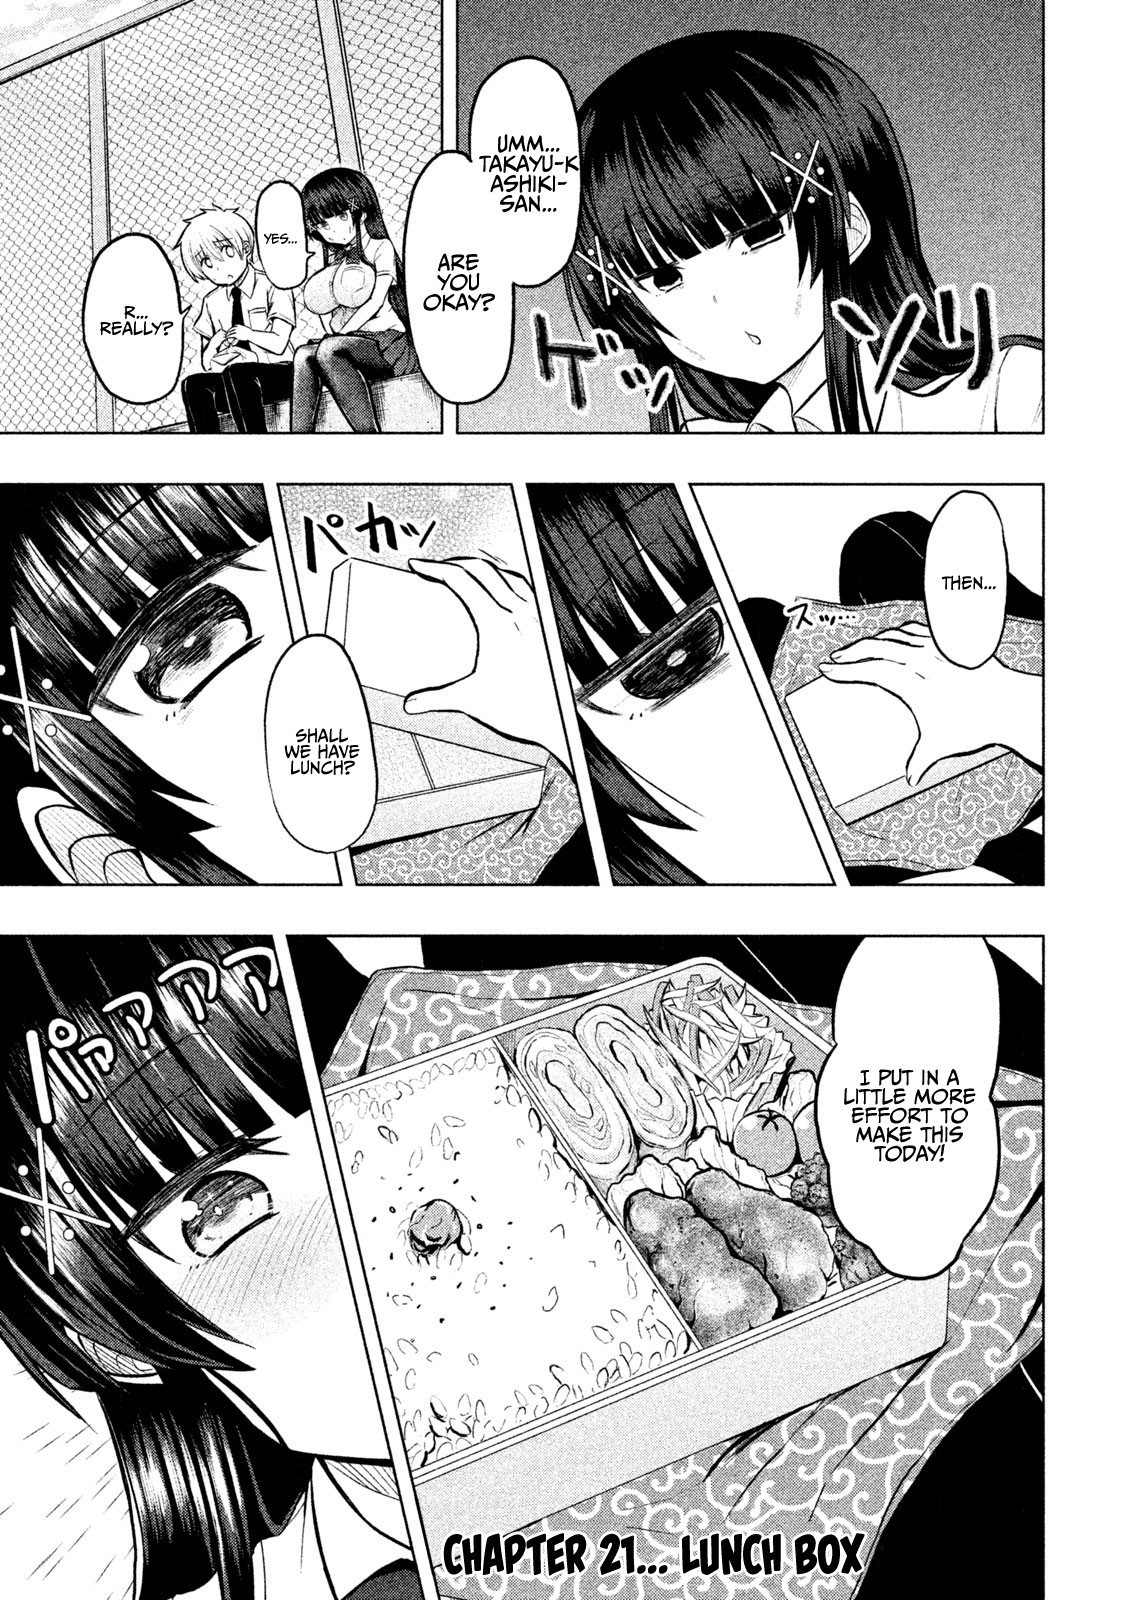 A Girl Who Is Very Well-Informed About Weird Knowledge, Takayukashiki Souko-San - Page 2